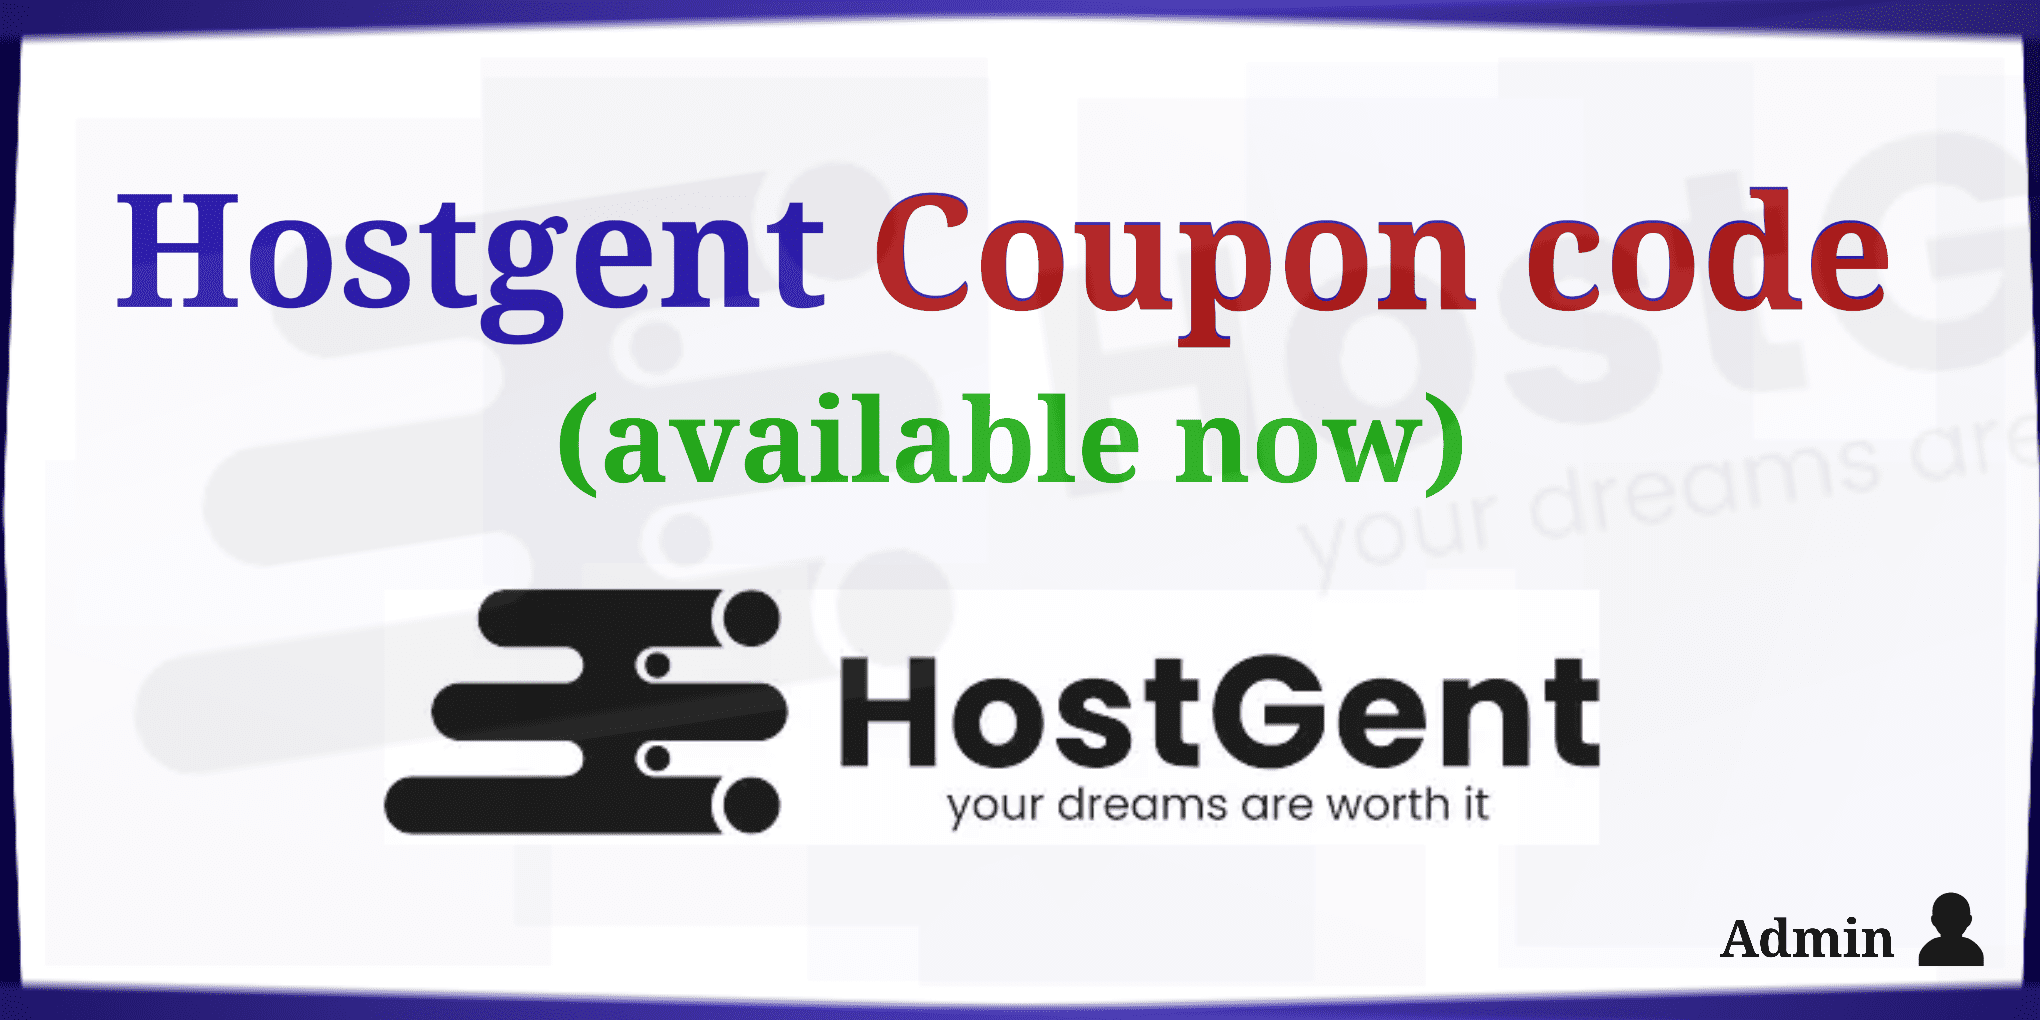 Hostgent Coupon code (Promotion code) available now - Inresite